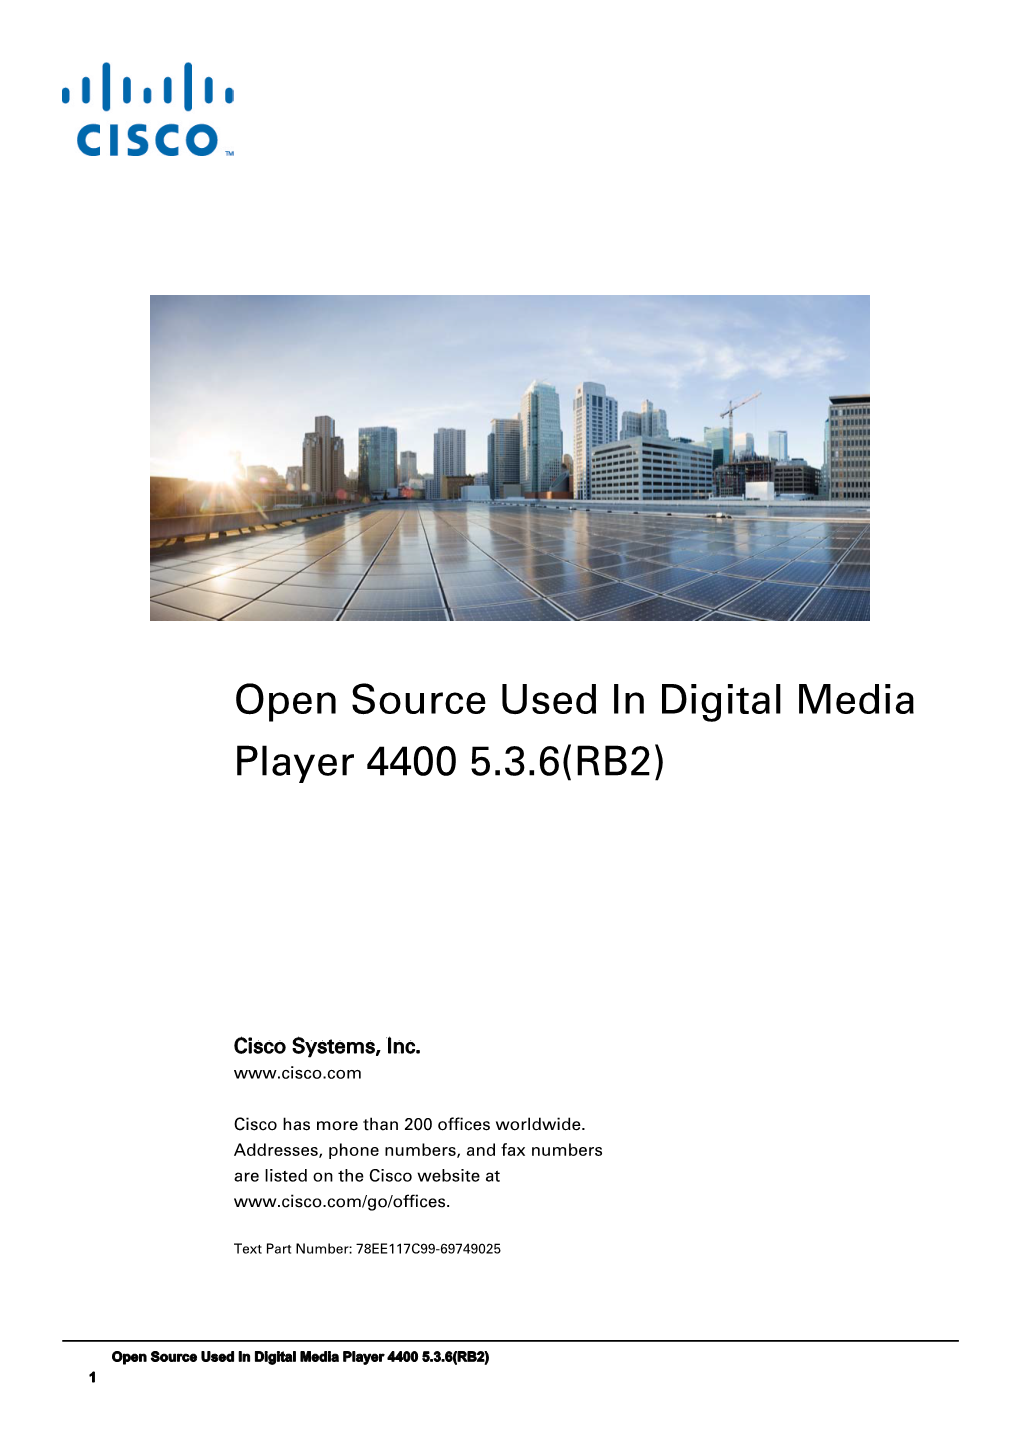 Open Source Used in Cisco Digital Media Player 4400G, Release 5.3.6